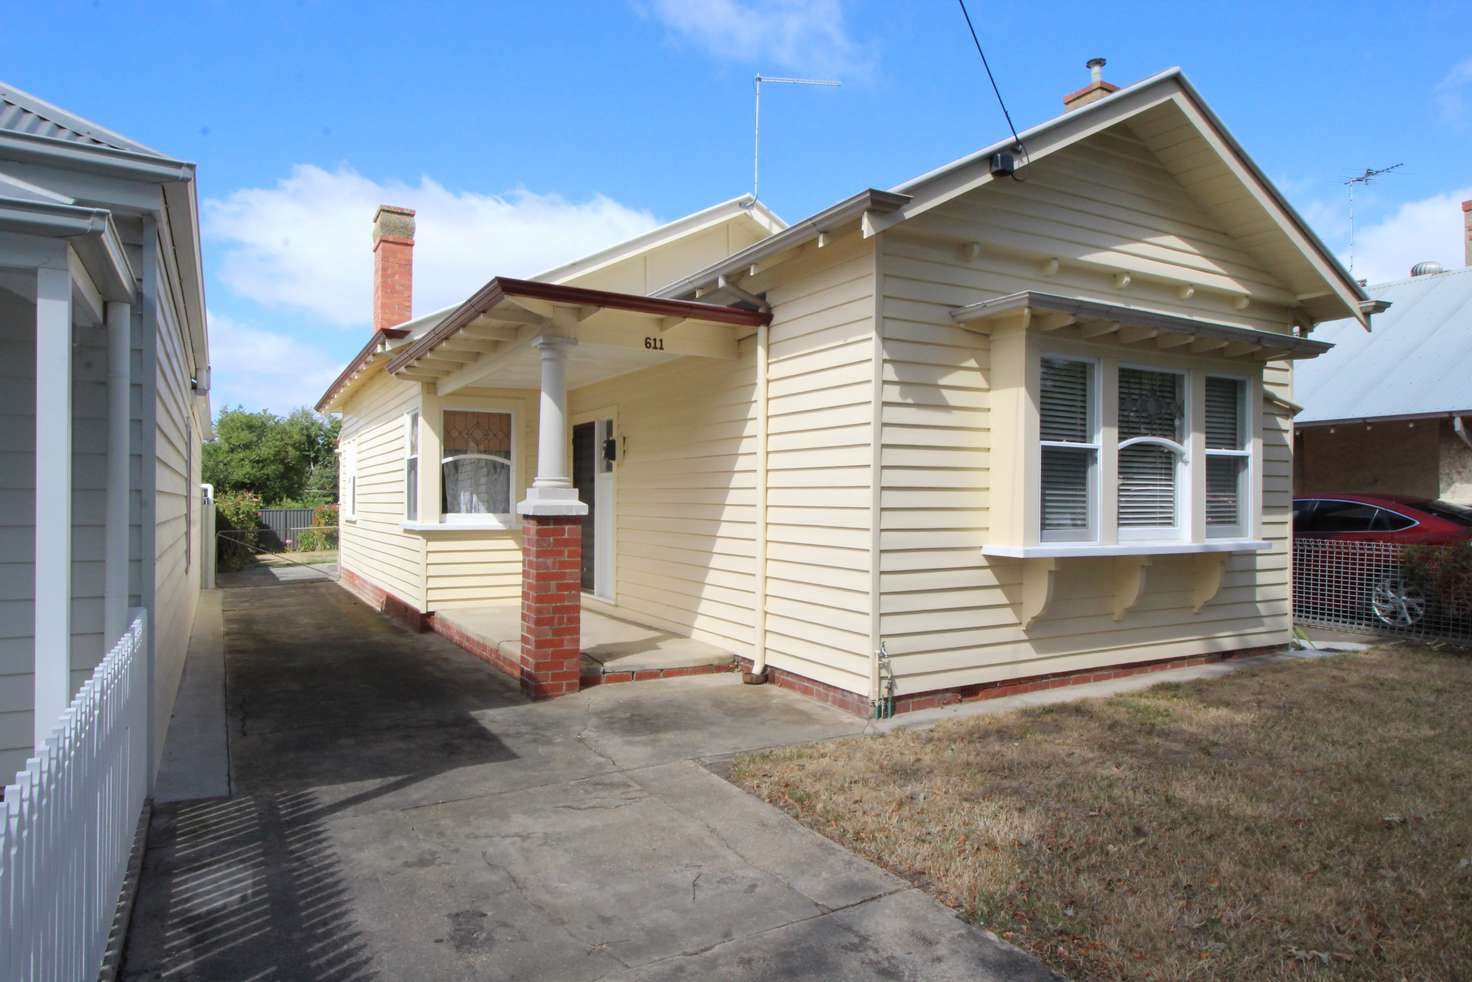 Main view of Homely house listing, 611 Dana St, Ballarat Central VIC 3350